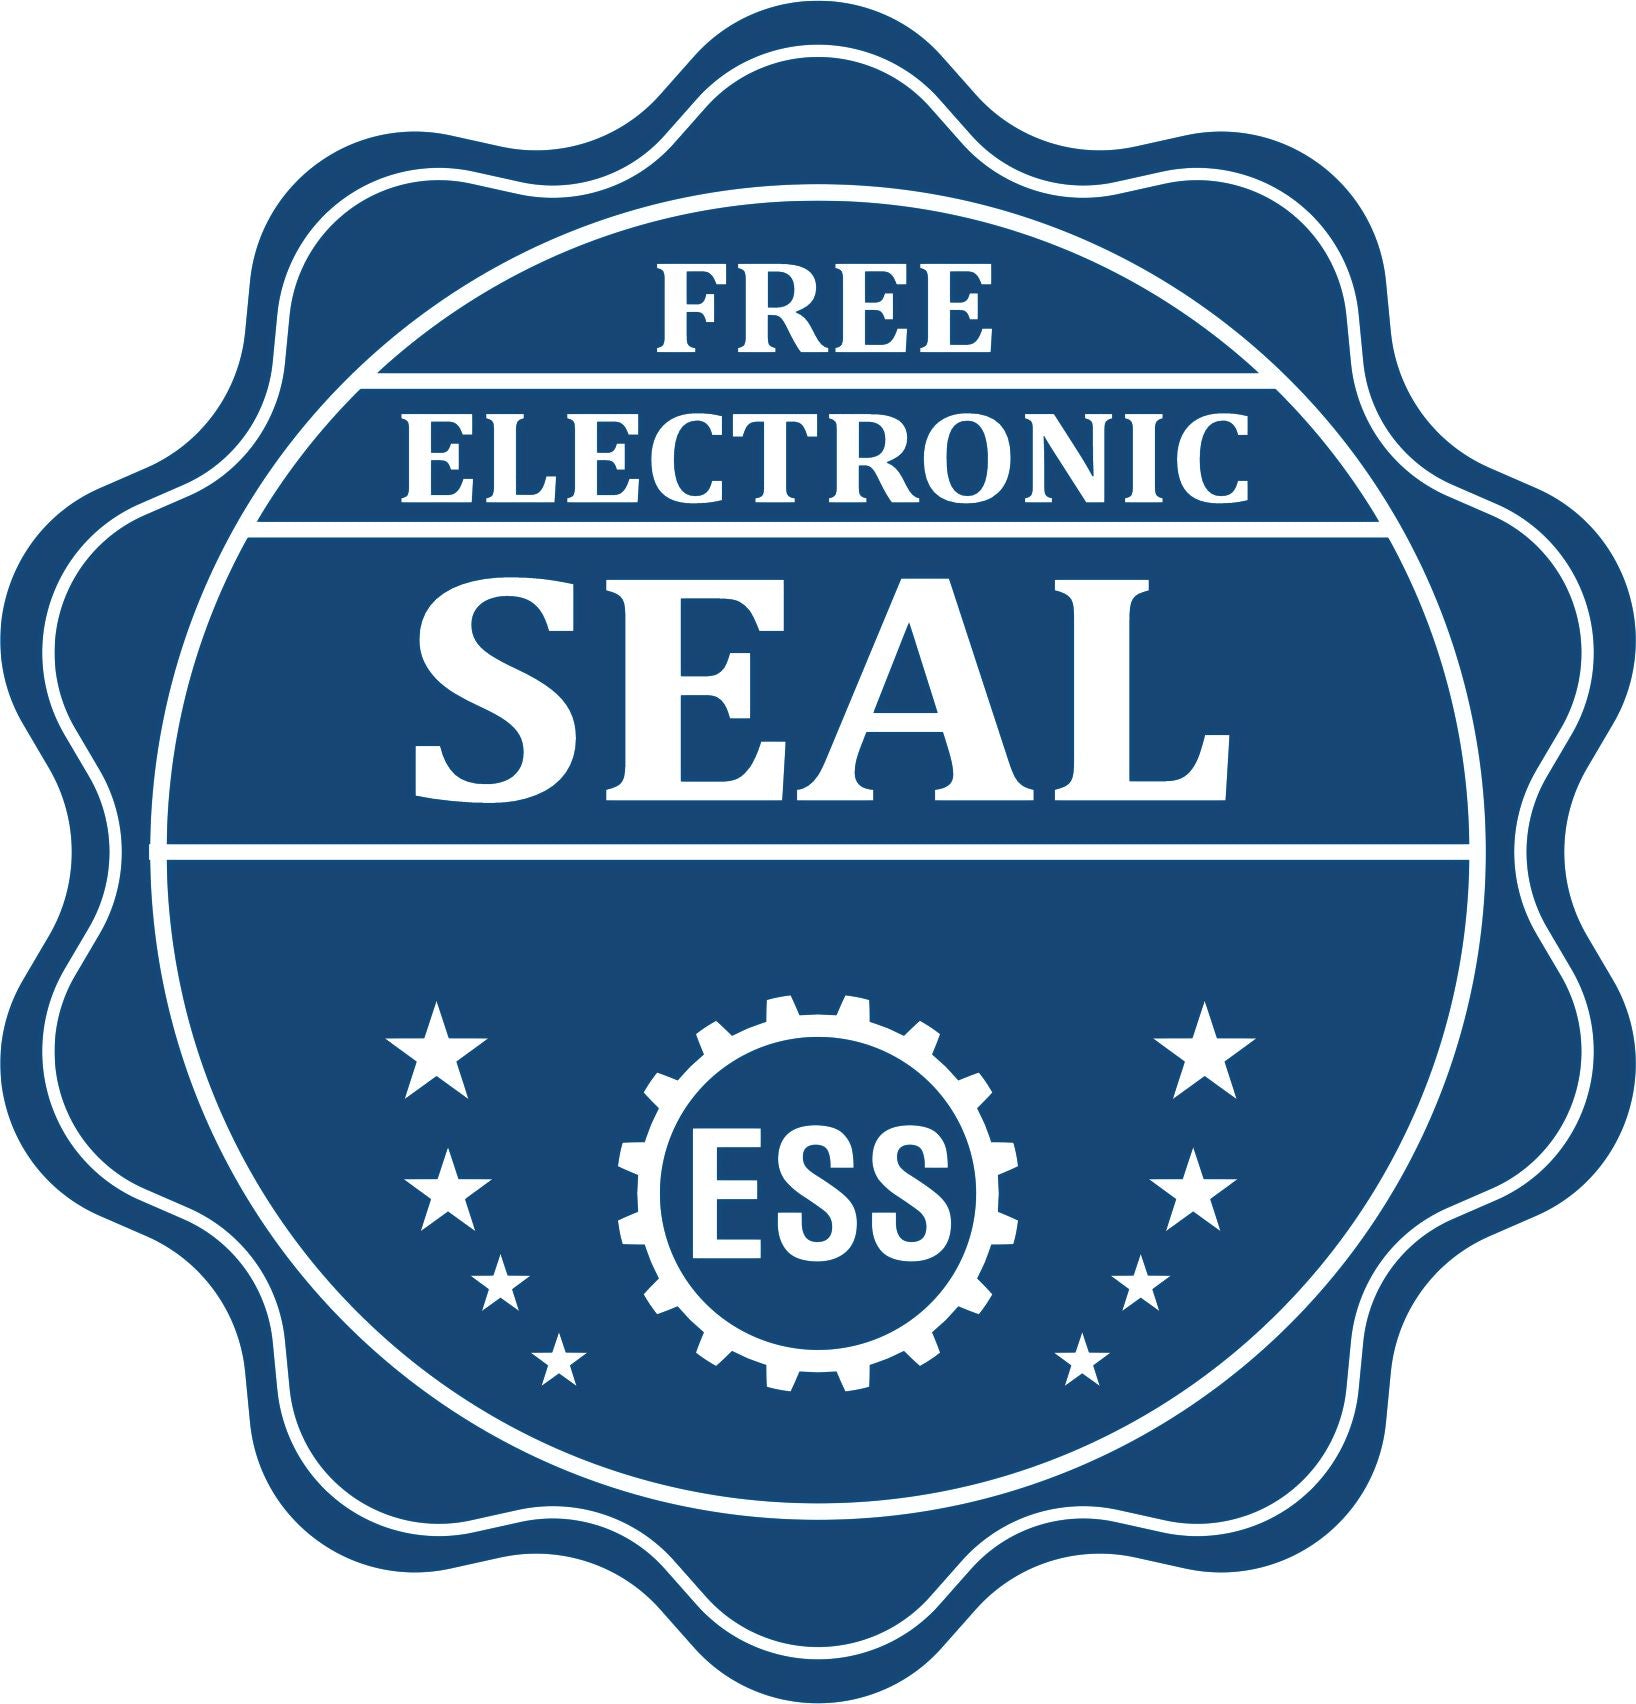 A badge showing a free electronic seal for the Wooden Handle Virginia State Seal Notary Public Stamp with stars and the ESS gear on the emblem.